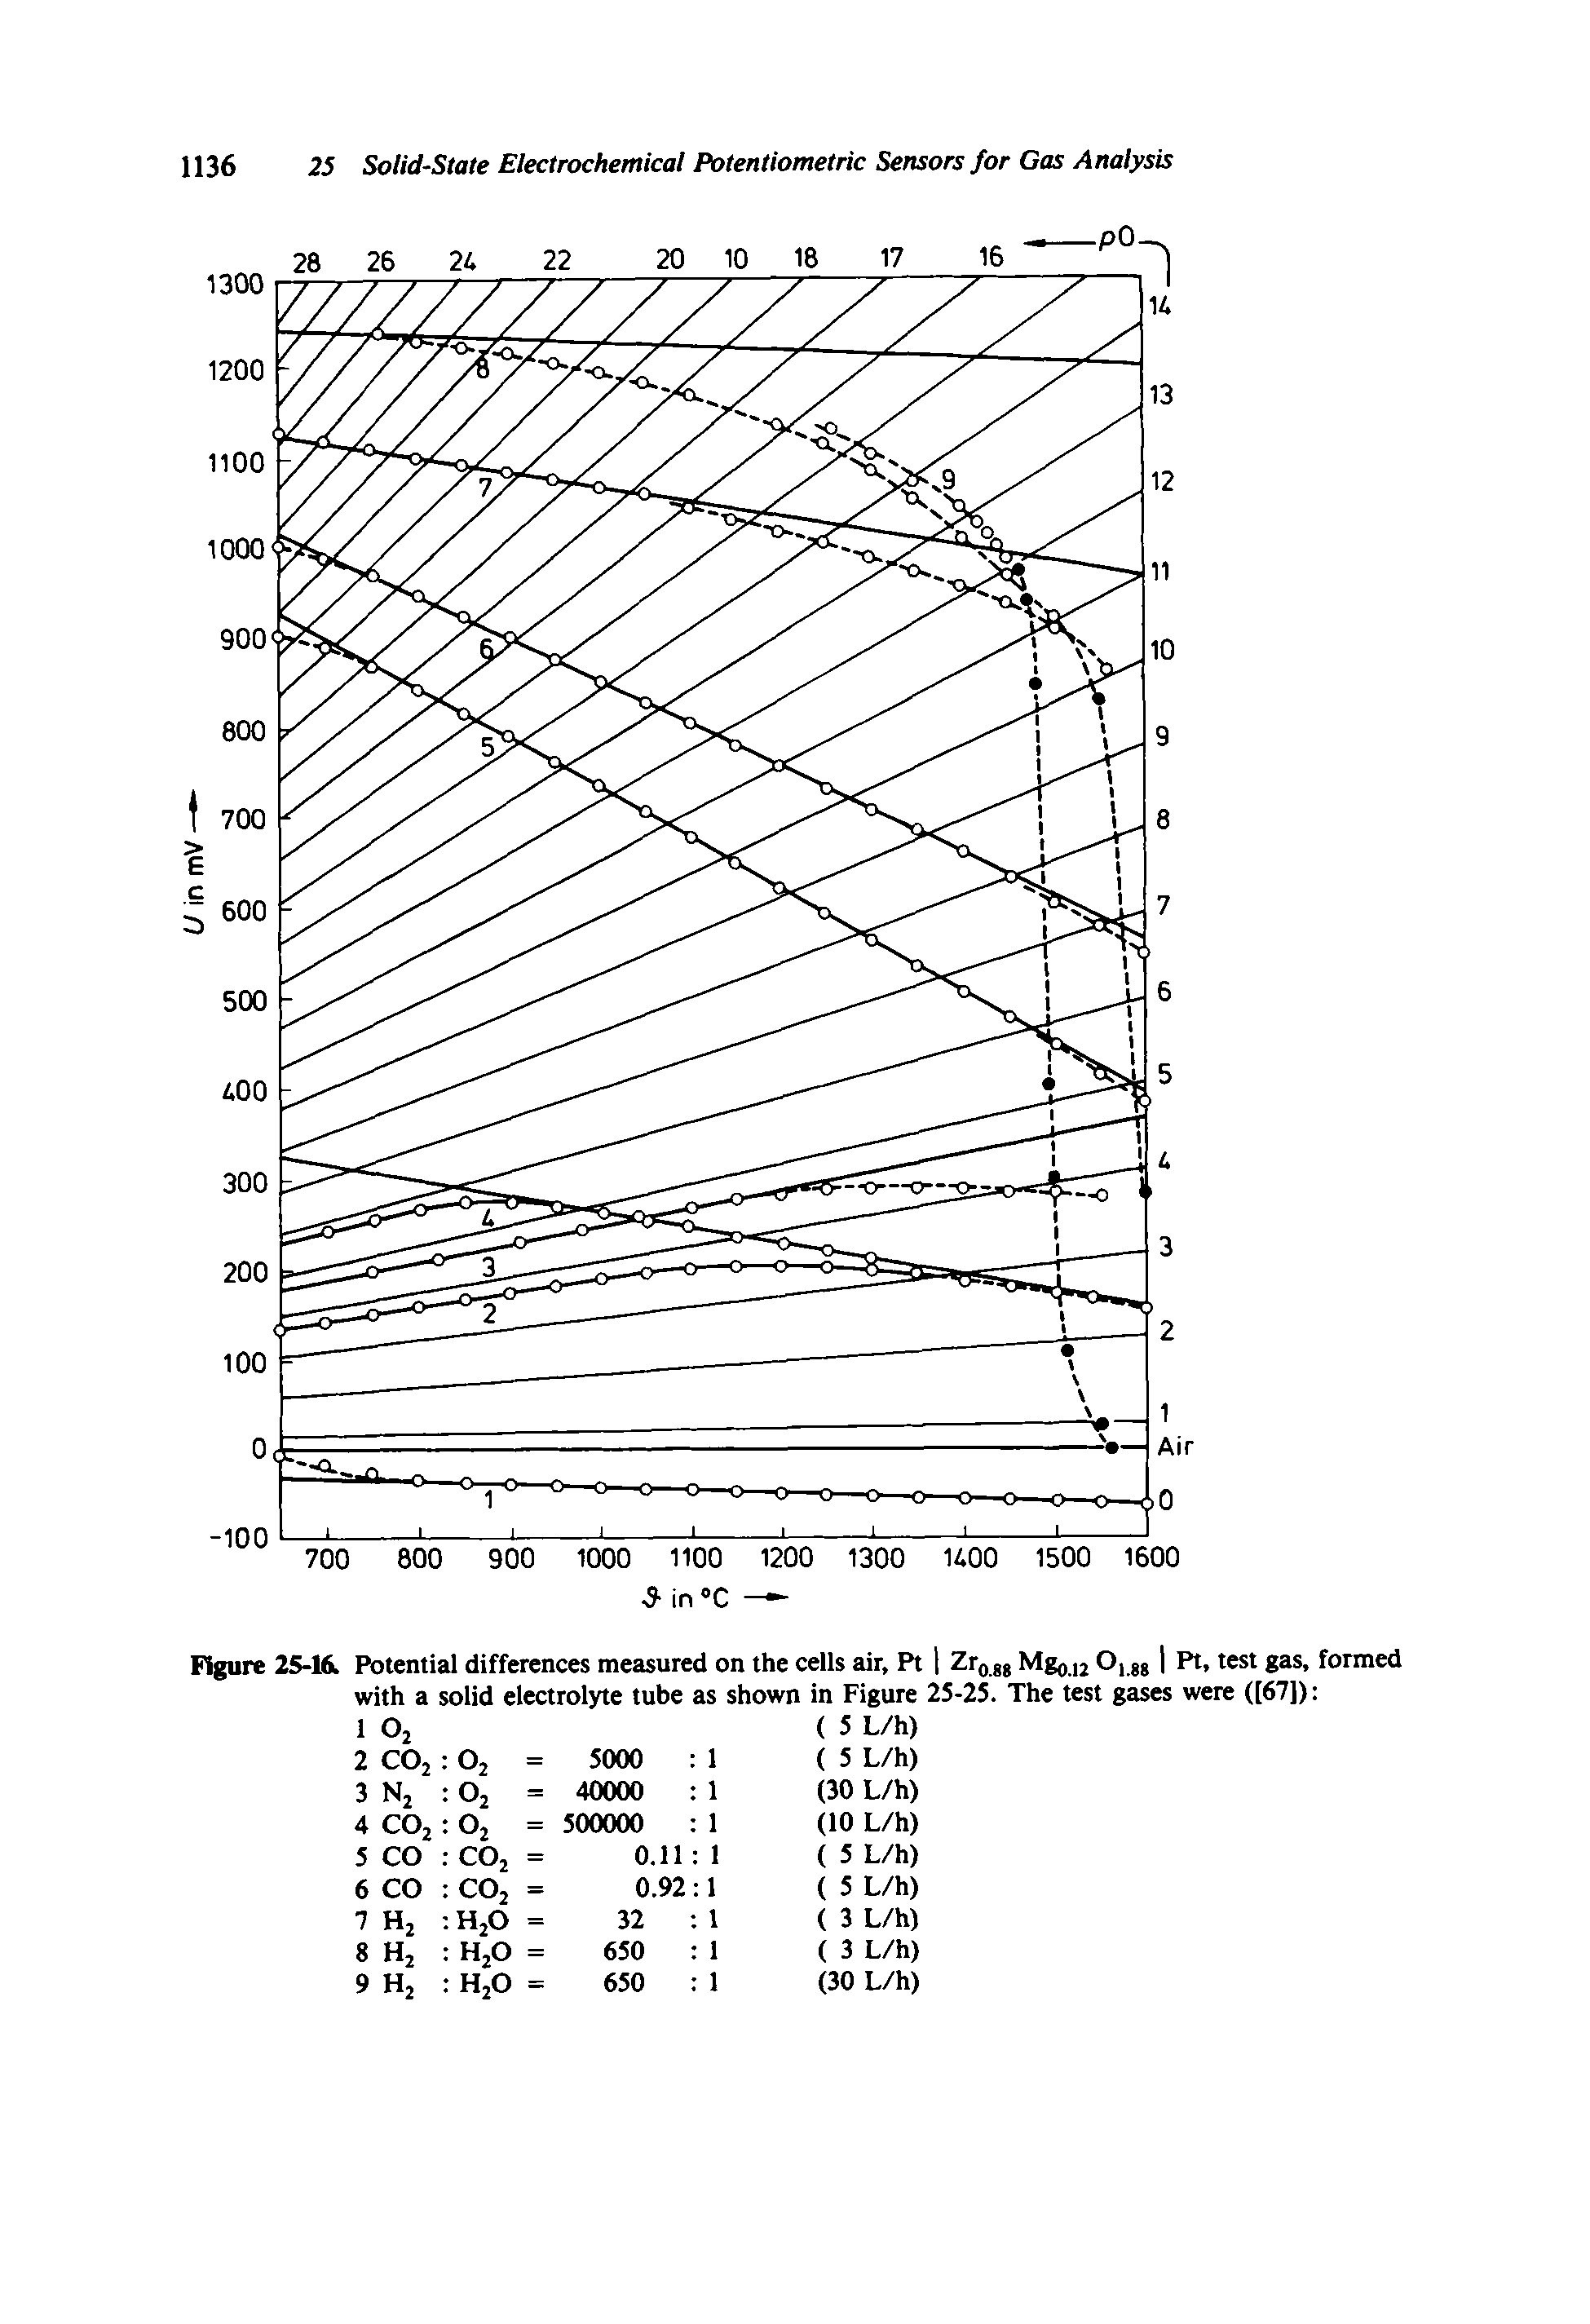 Figure 25-1 Potential differences measured on the cells air, Pt 1 Zr gg Mg u O, gg 1 Pt, test gas, formed with a solid electrolyte tube as shown in Figure 25-25. The test gases were ([67]) ...